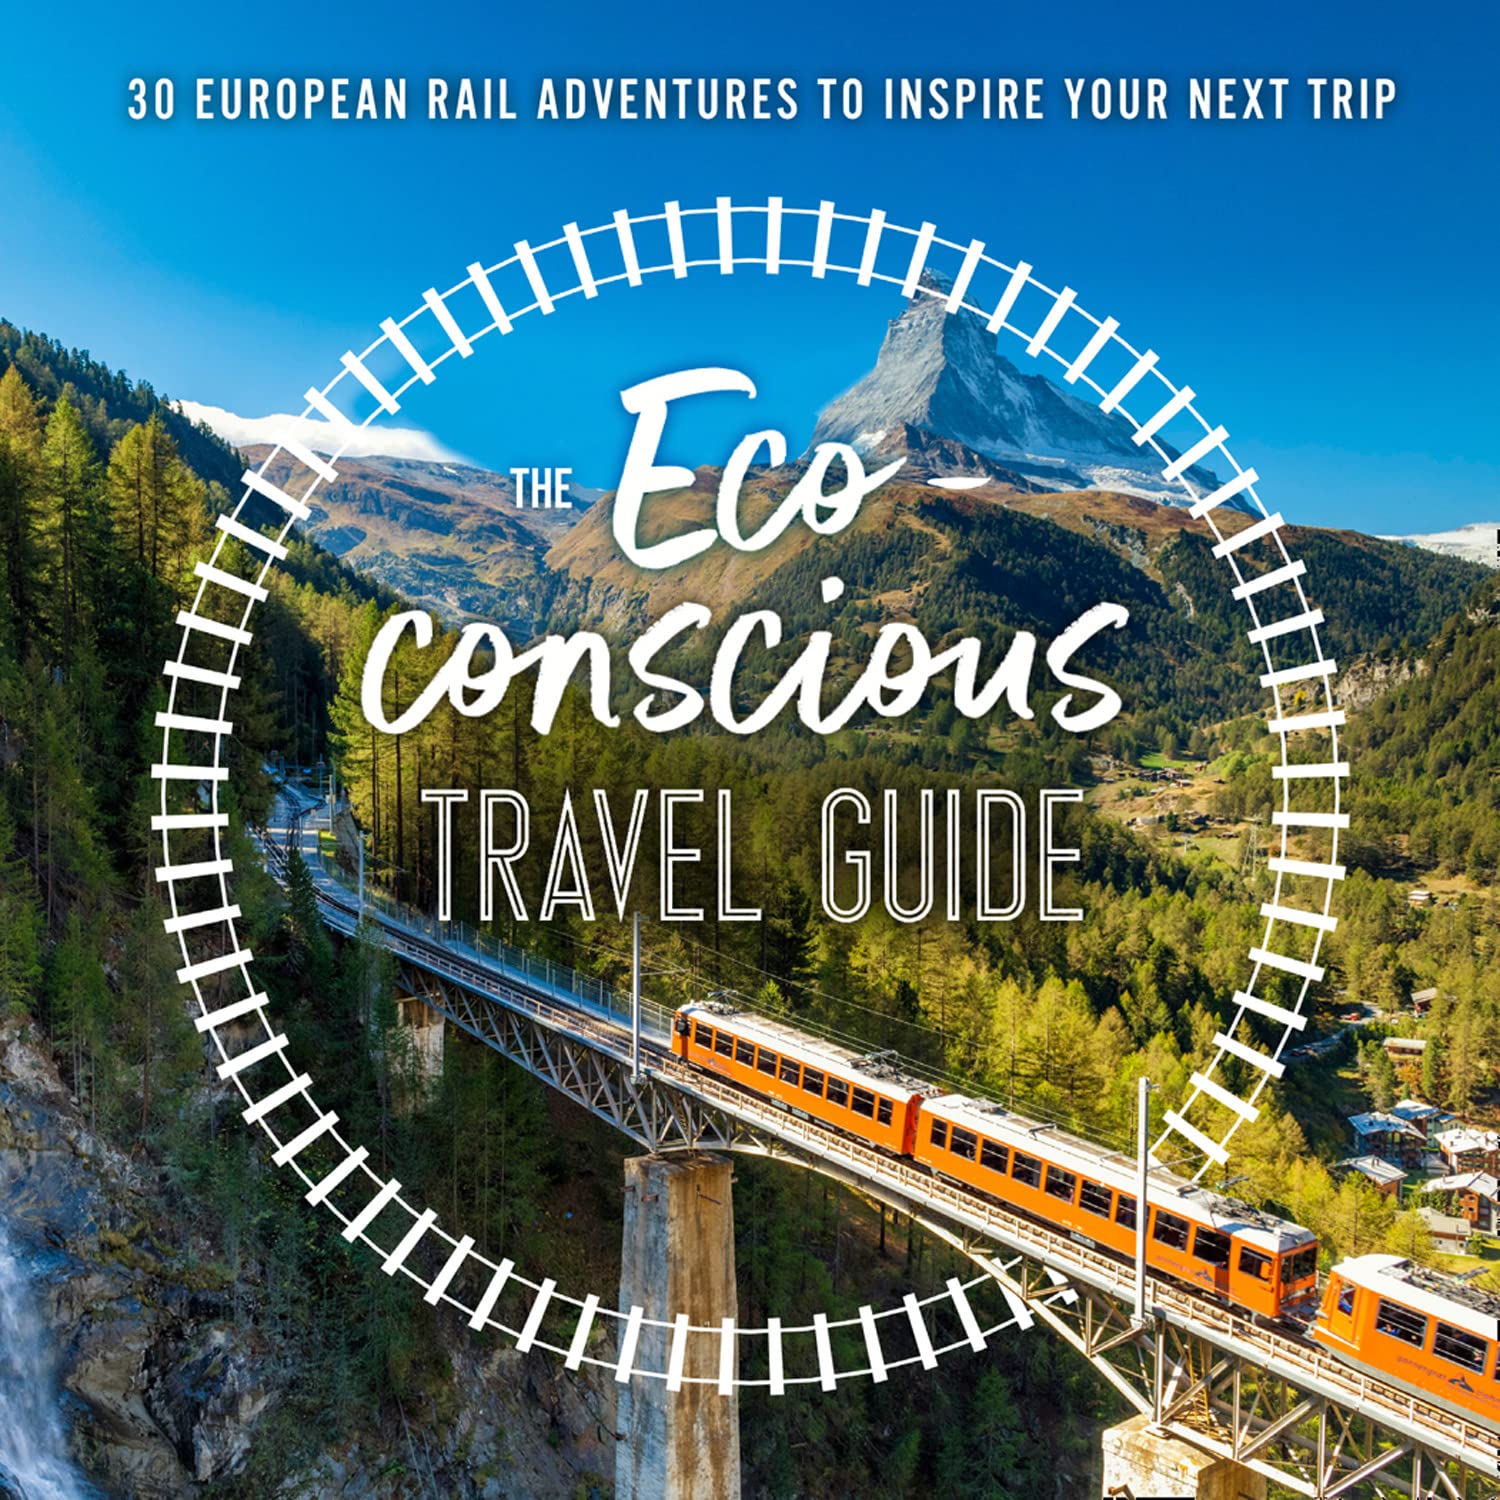 The Eco-conscjous Travel Guide